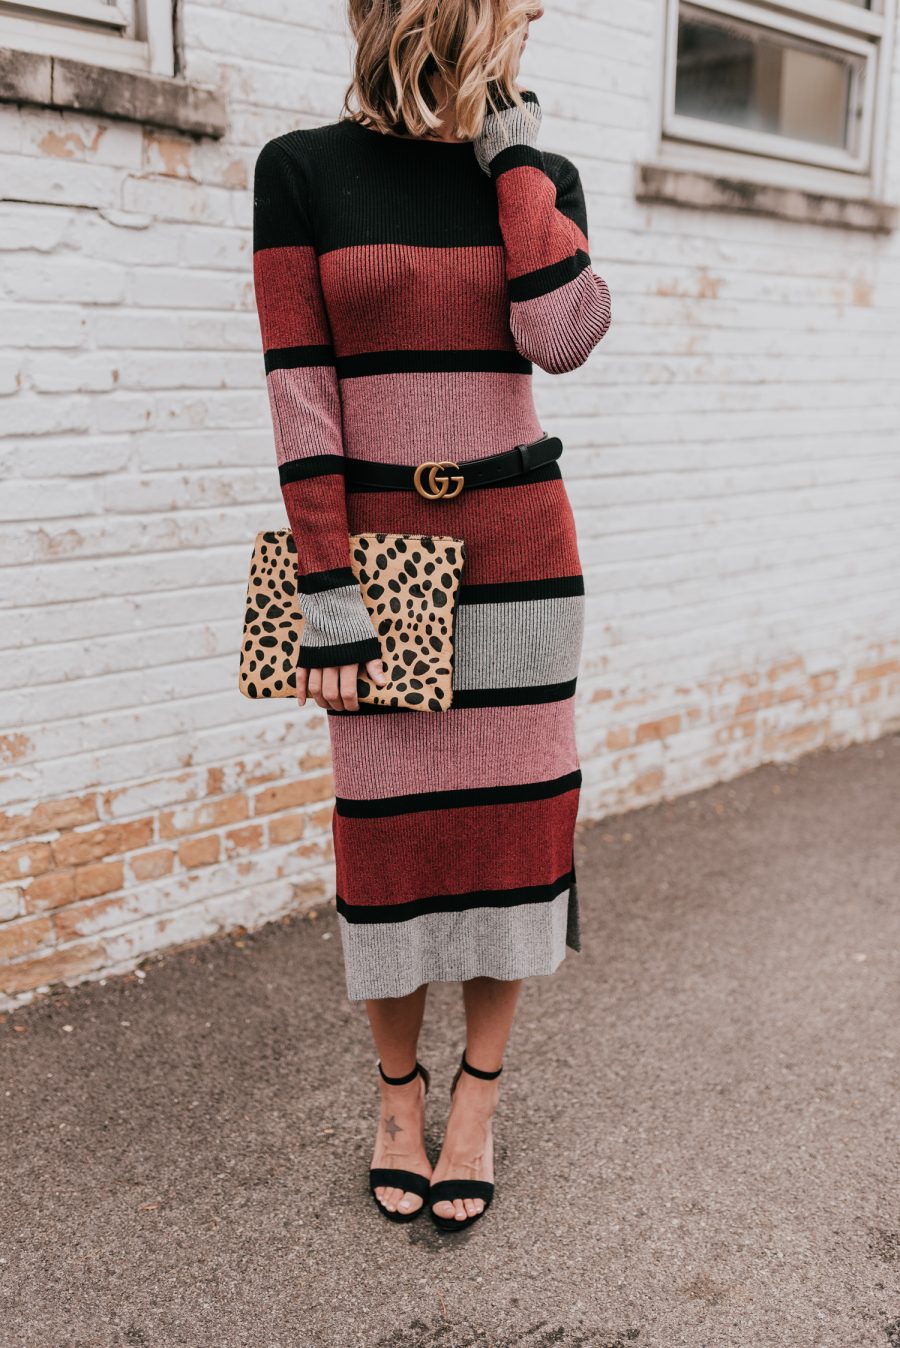 Suzanne wearing a sweater dress, black heels, and a clutch 